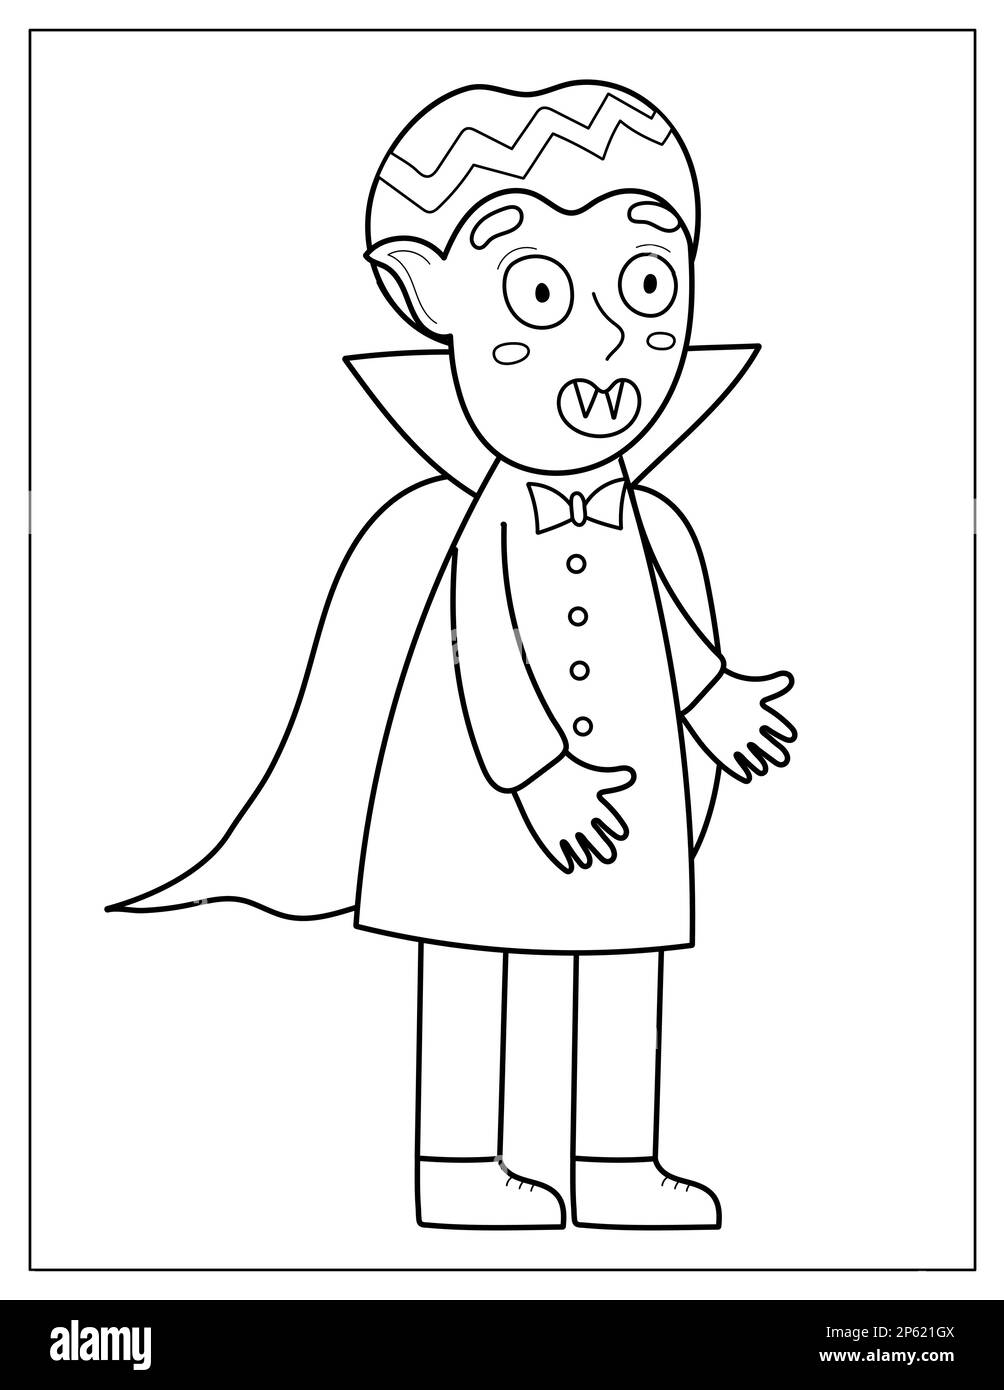 Halloween coloring page with a cute vampire spooky print in cartoon style stock vector image art